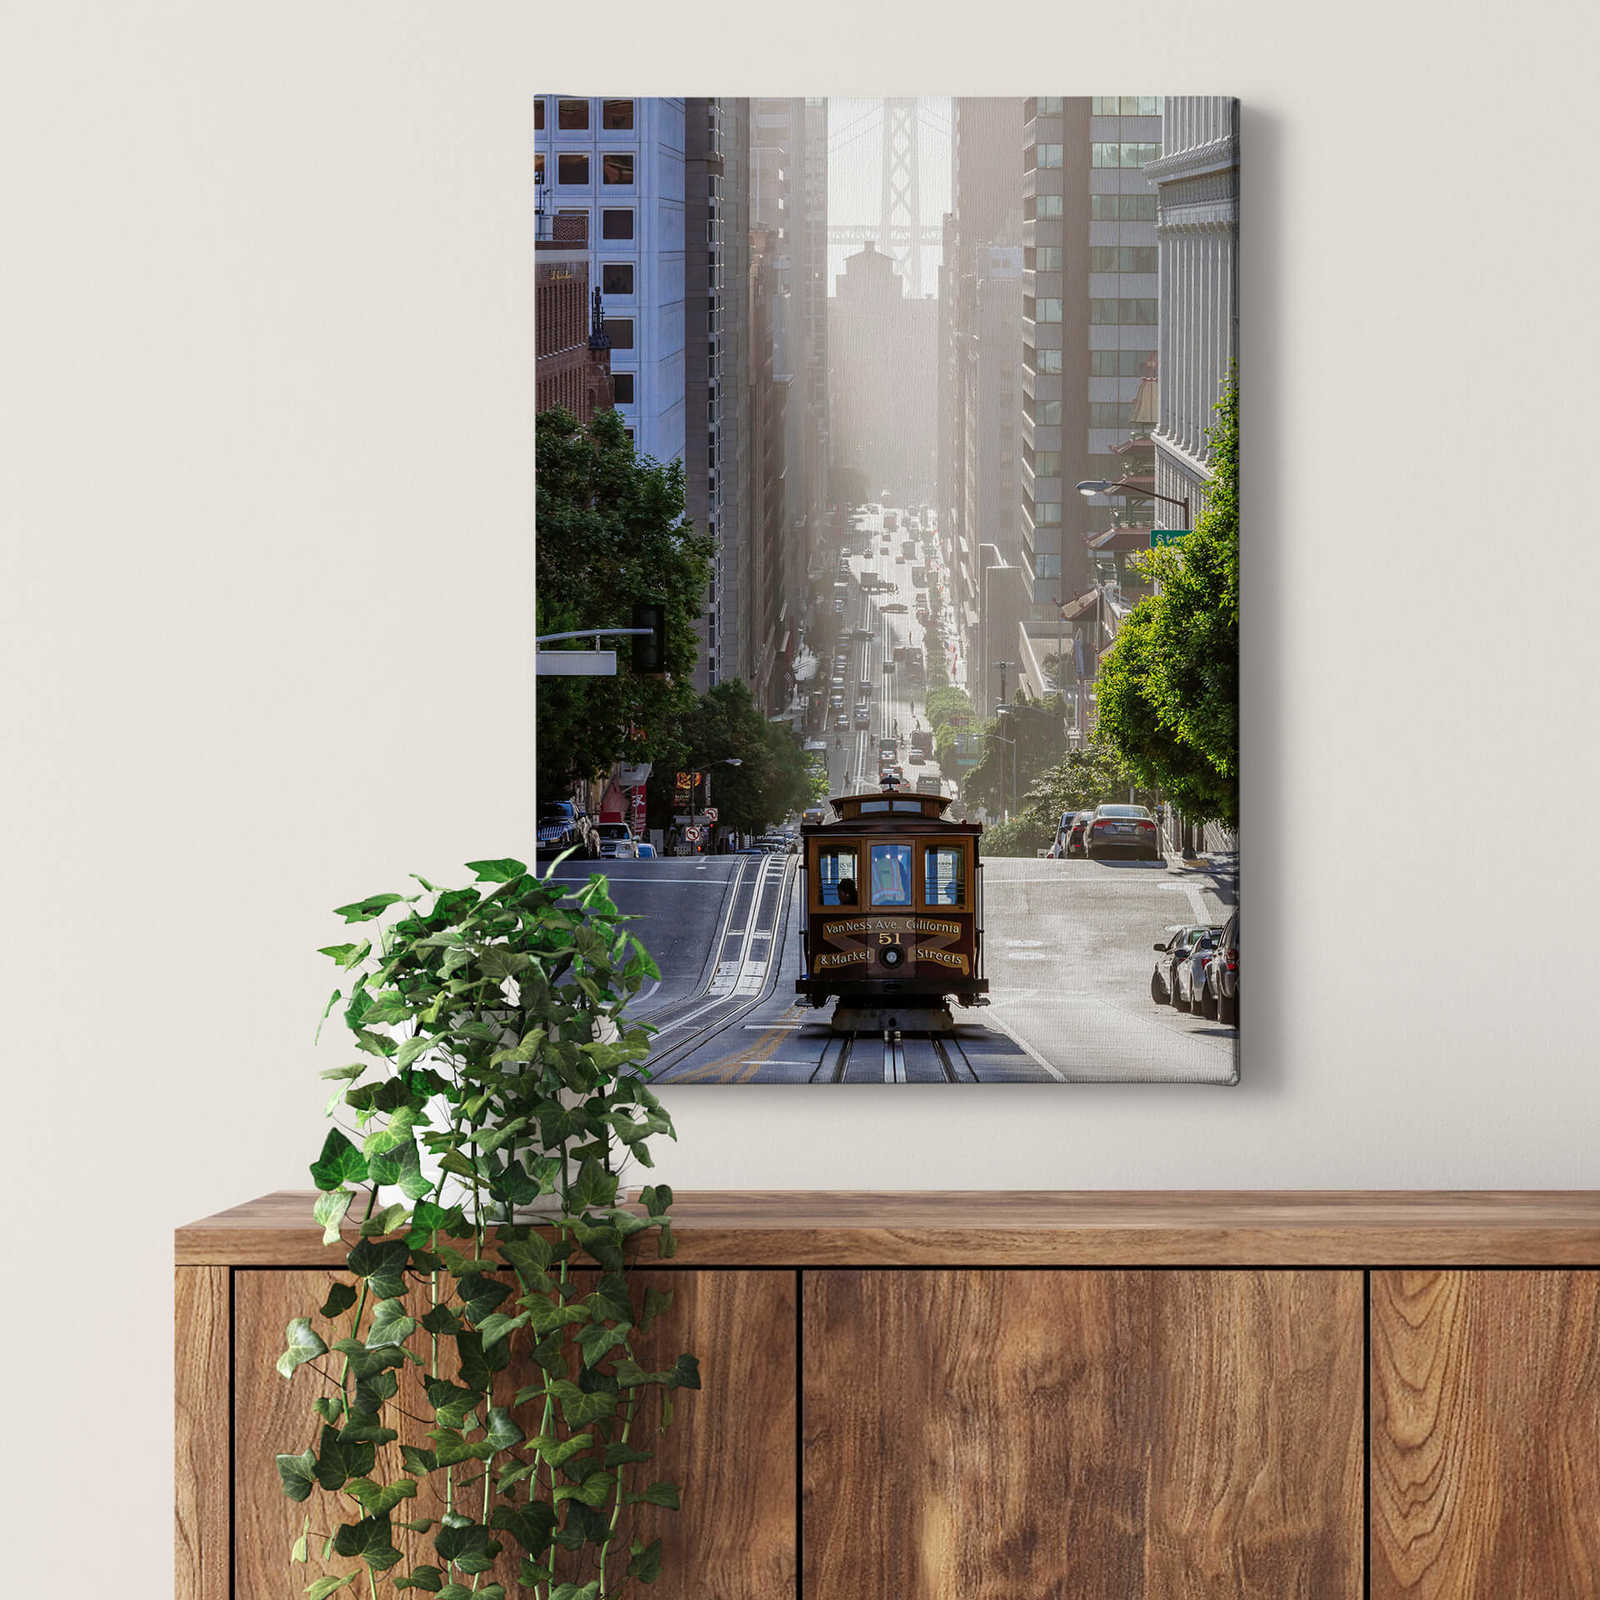             Canvas print San Francisco cable car, photo by Colombo
        